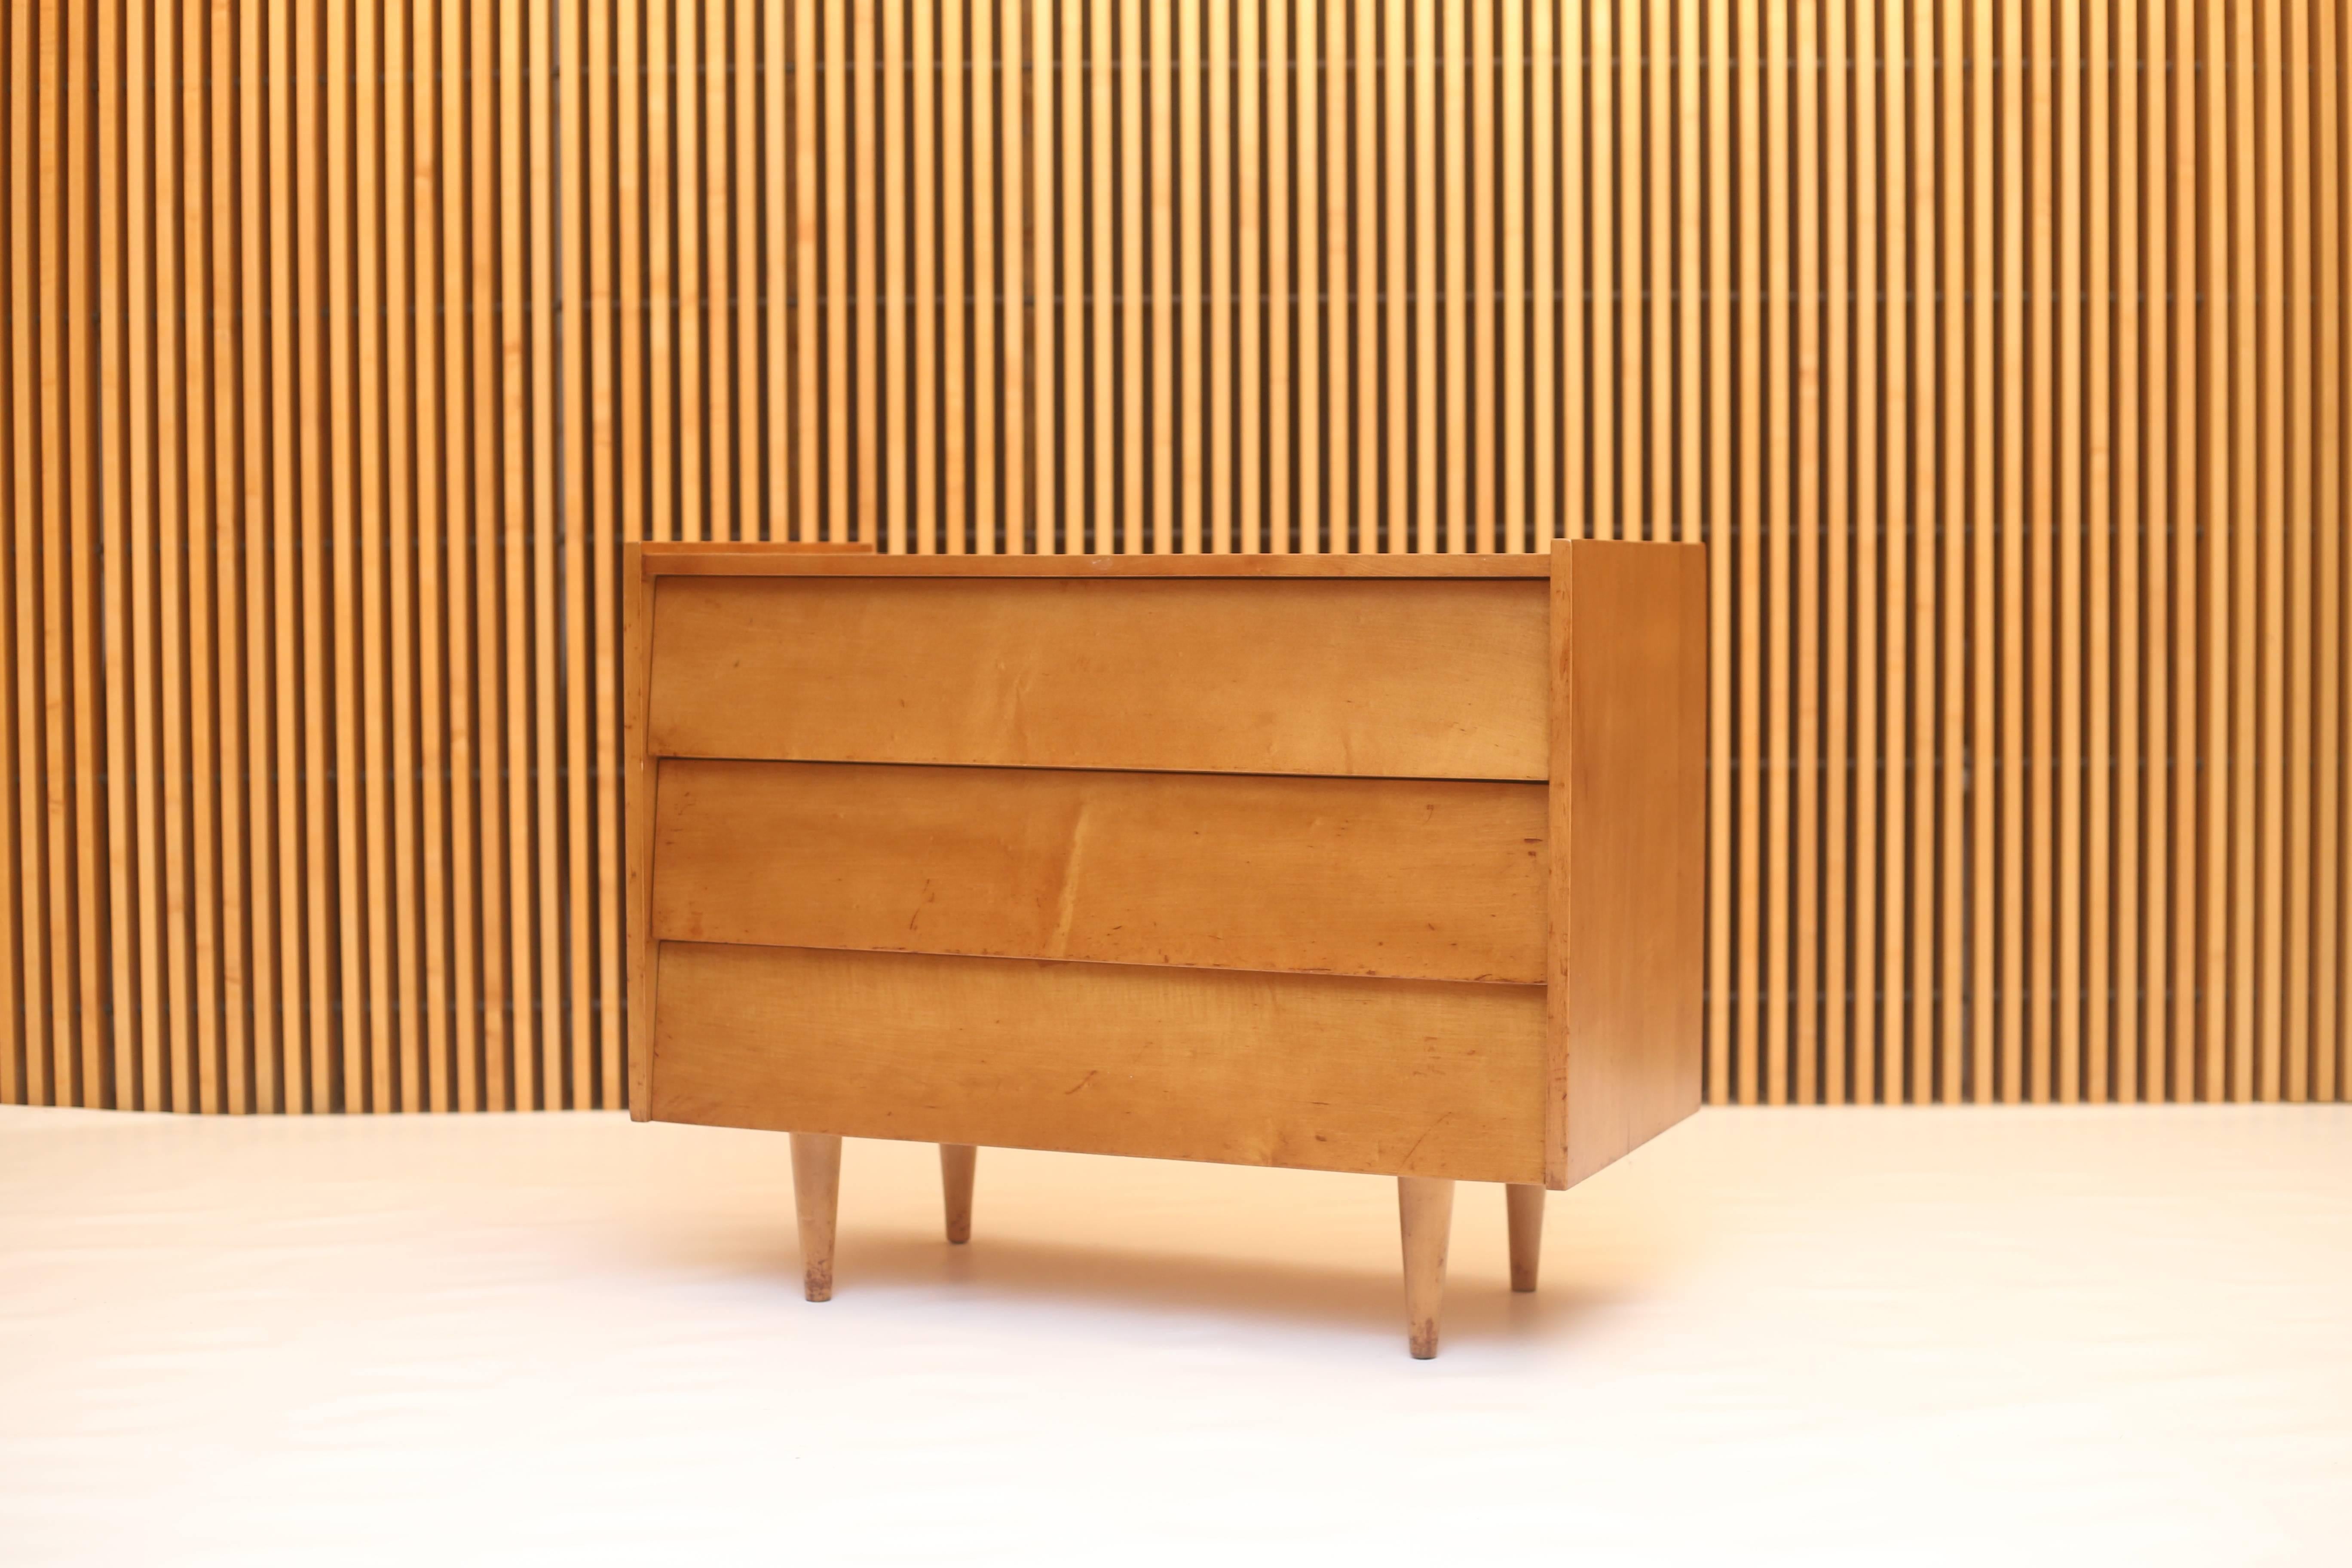 An early example retaining its 601 Madison Ave label dates this cabinet to the late 1940s. This small chest consists of three drawers with louvered fronts. The raised edges on the top is a rare configuration. Solid maple construction and was